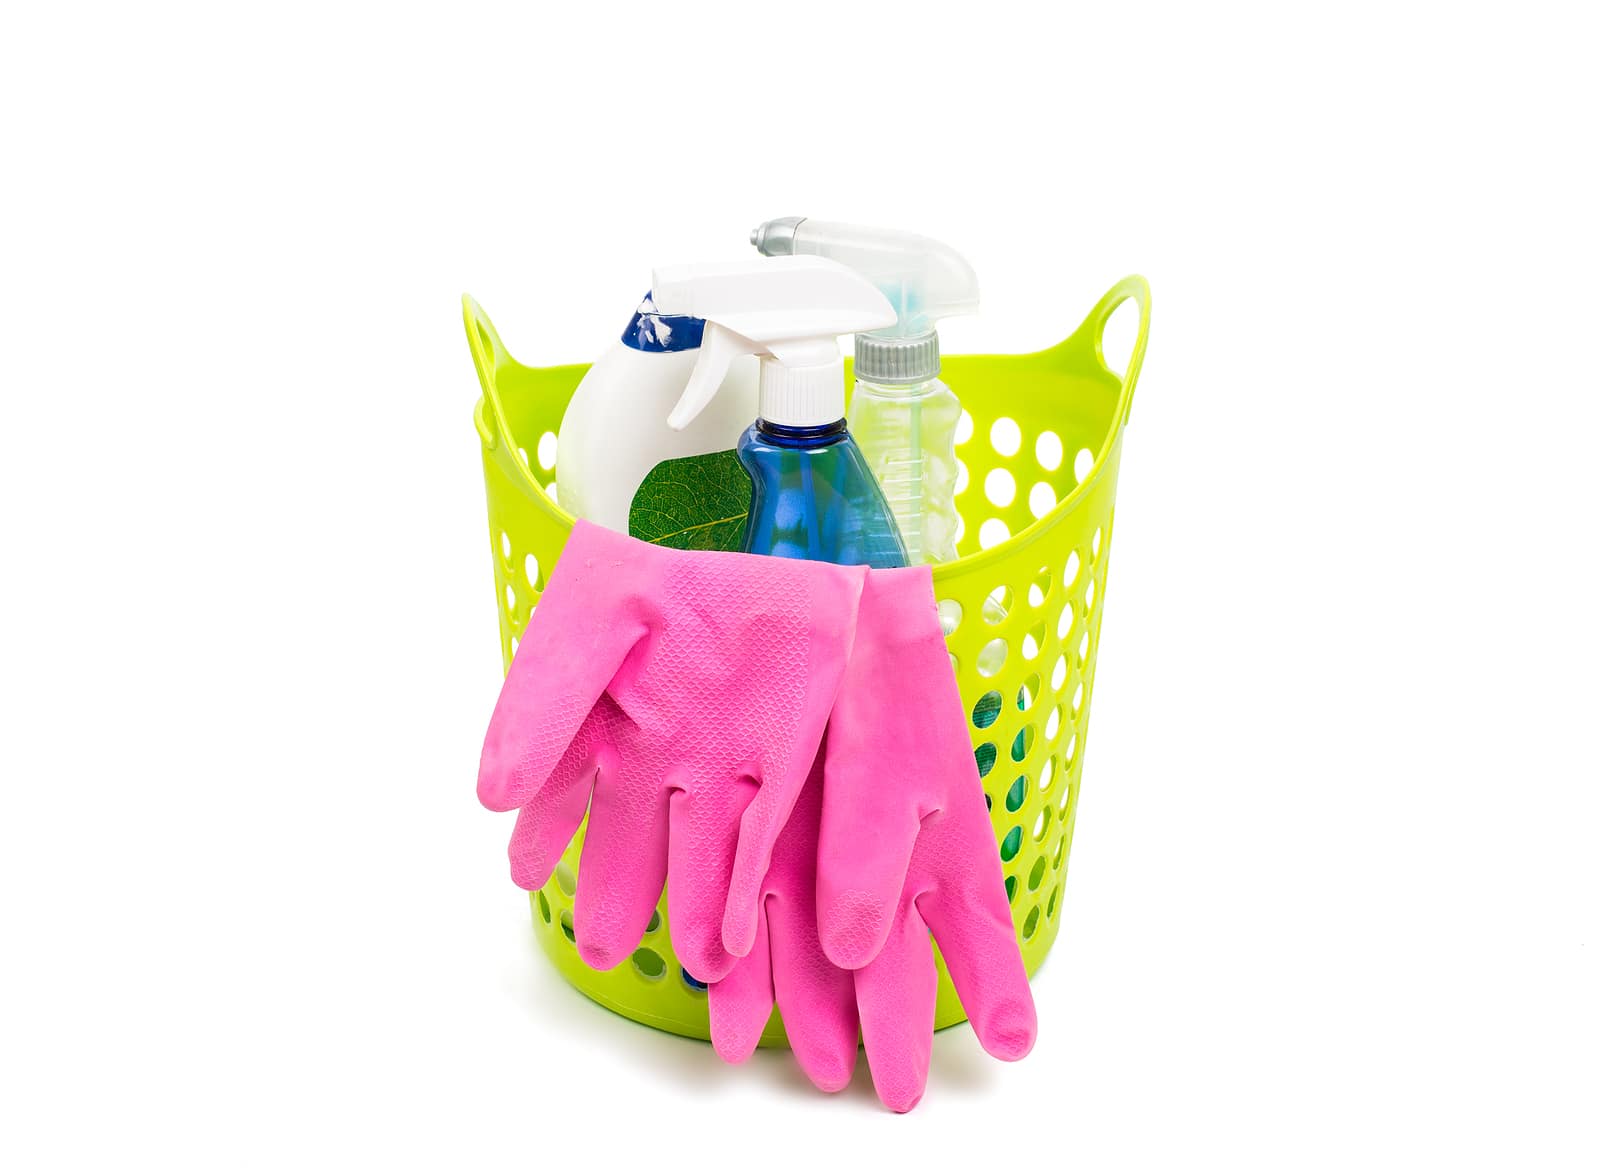 cleaning kit housekeeping on a white background